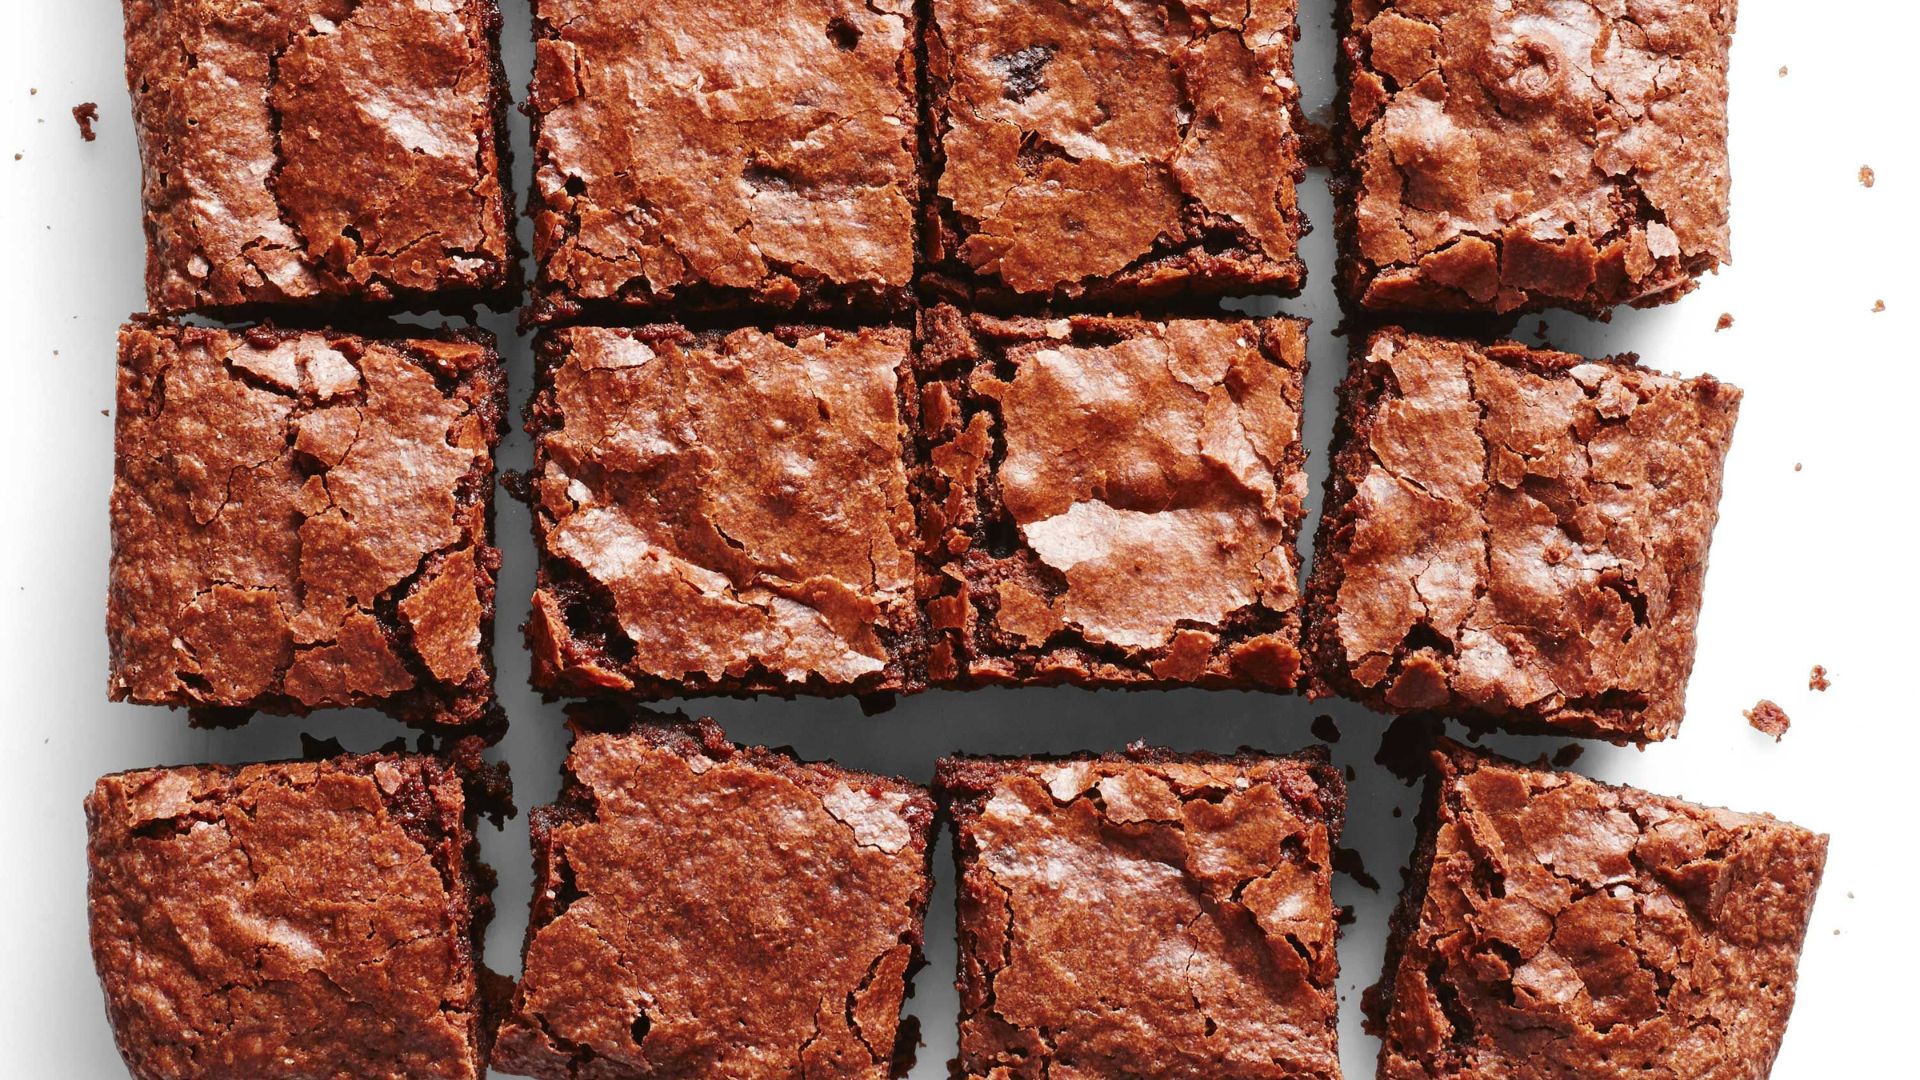 this image shows Chocolate Brownies